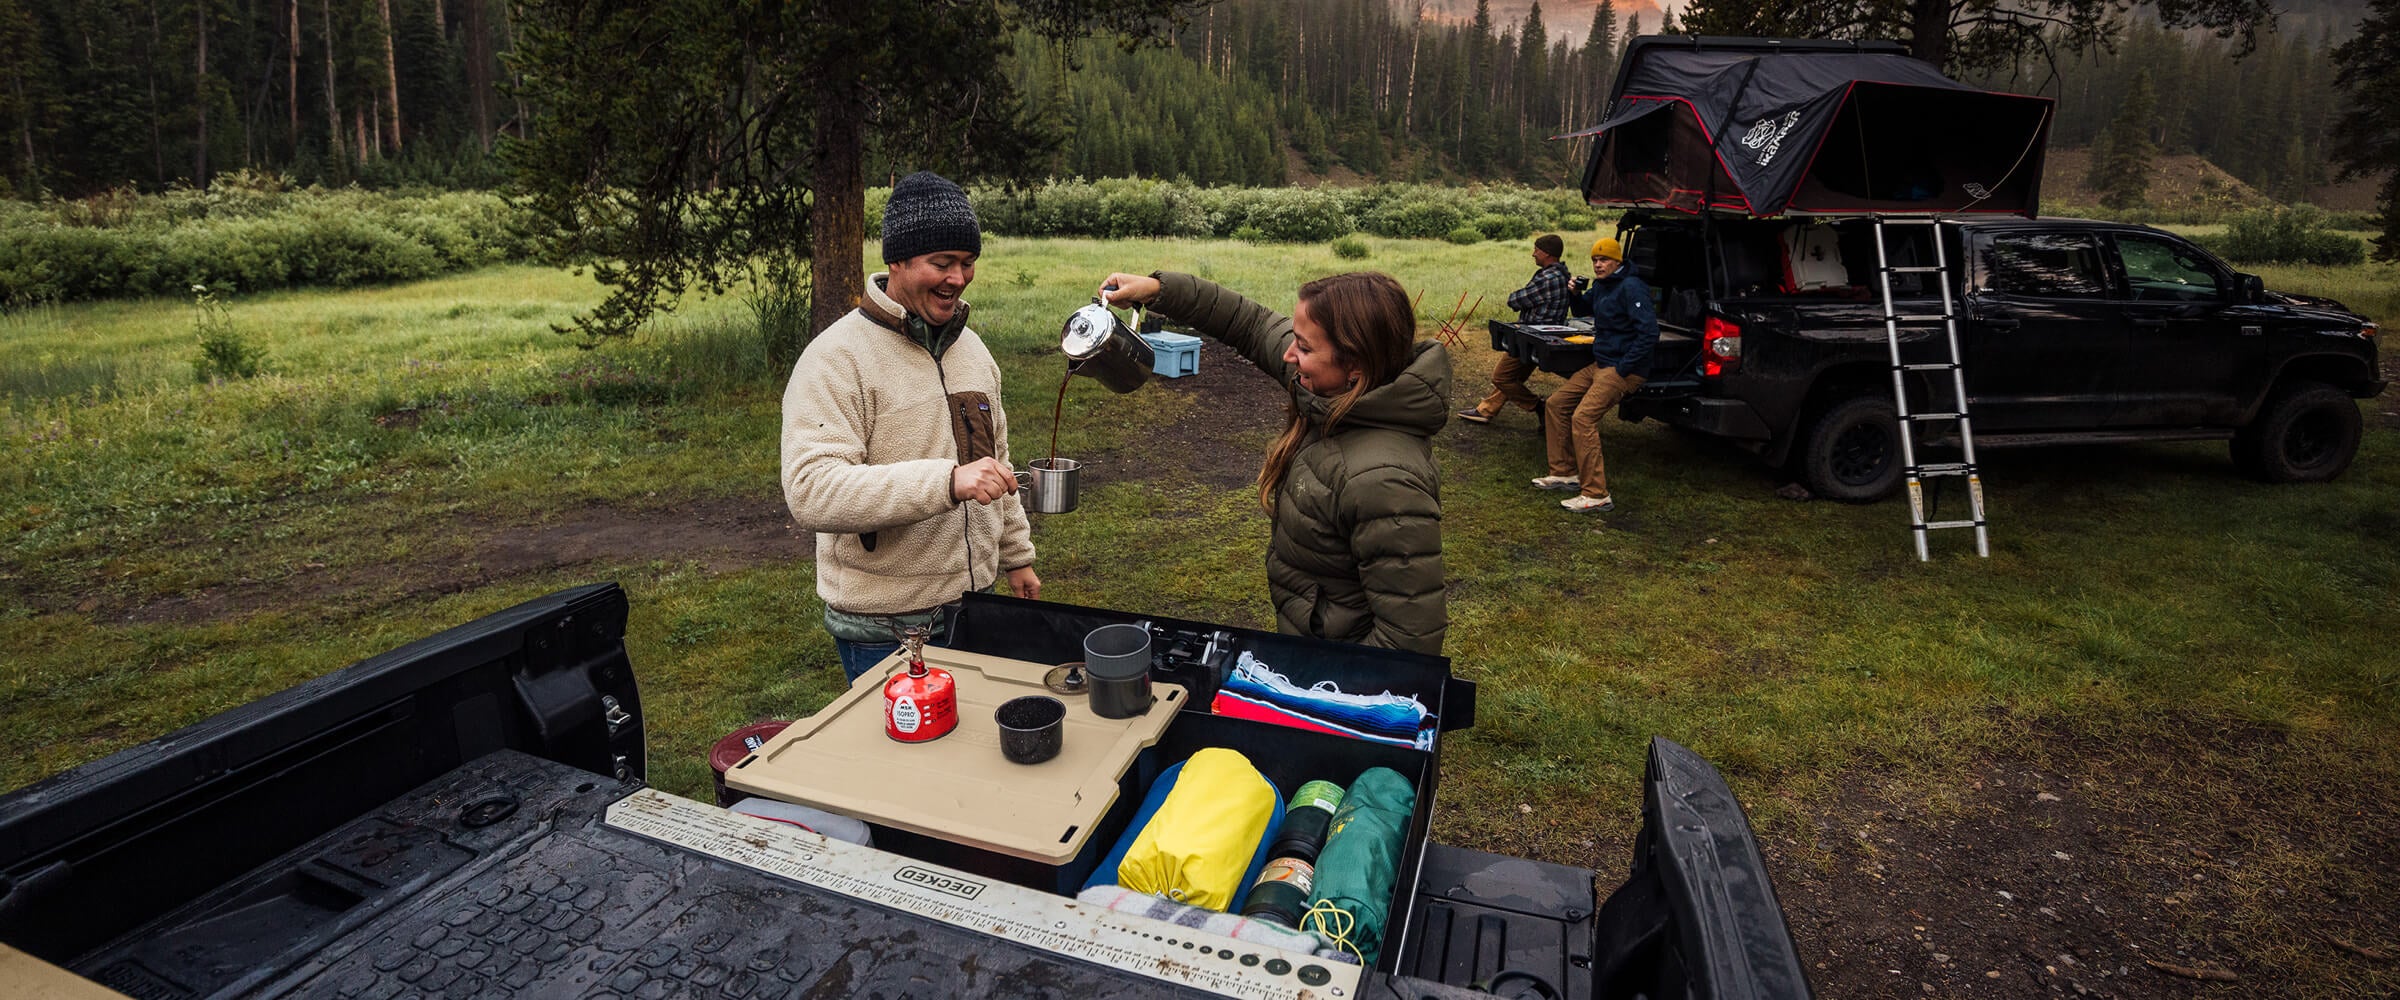 Decked employees at a campsite pouring coffee for each other, using the drawer system as a tabletop.